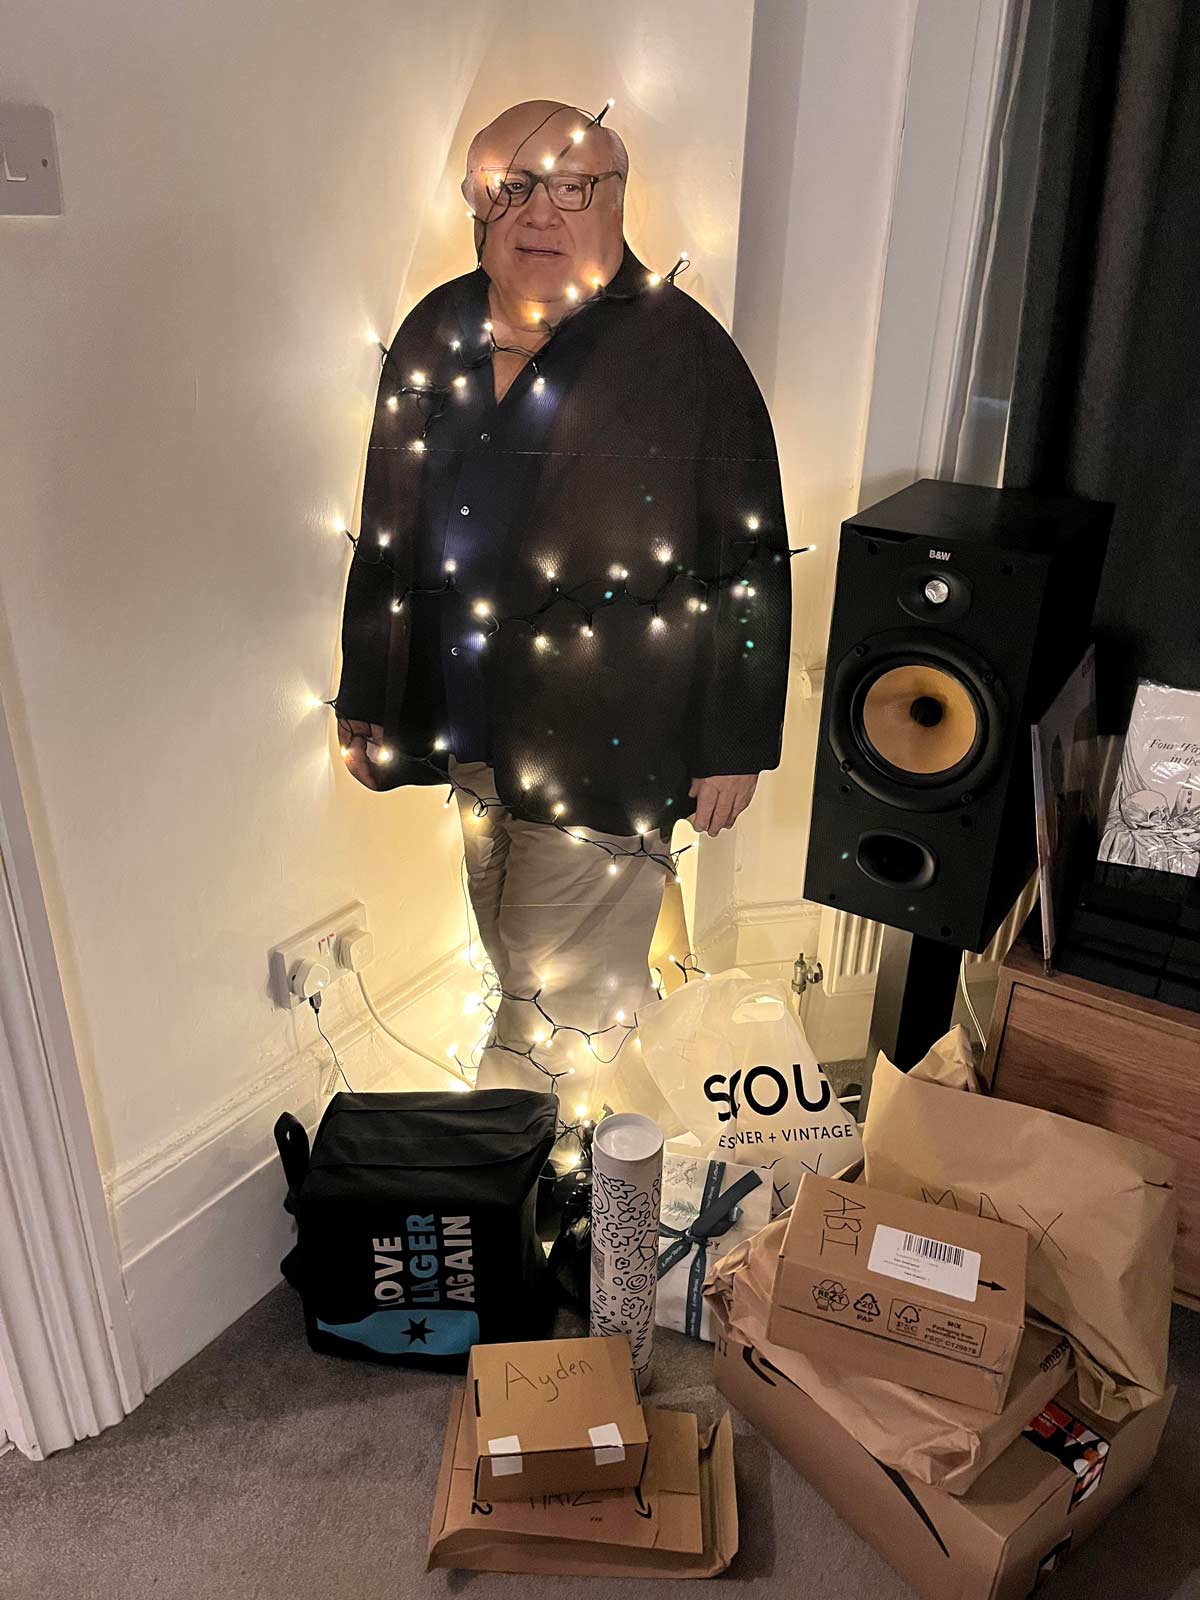 We don’t have a Christmas tree so we used Danny DeVito instead